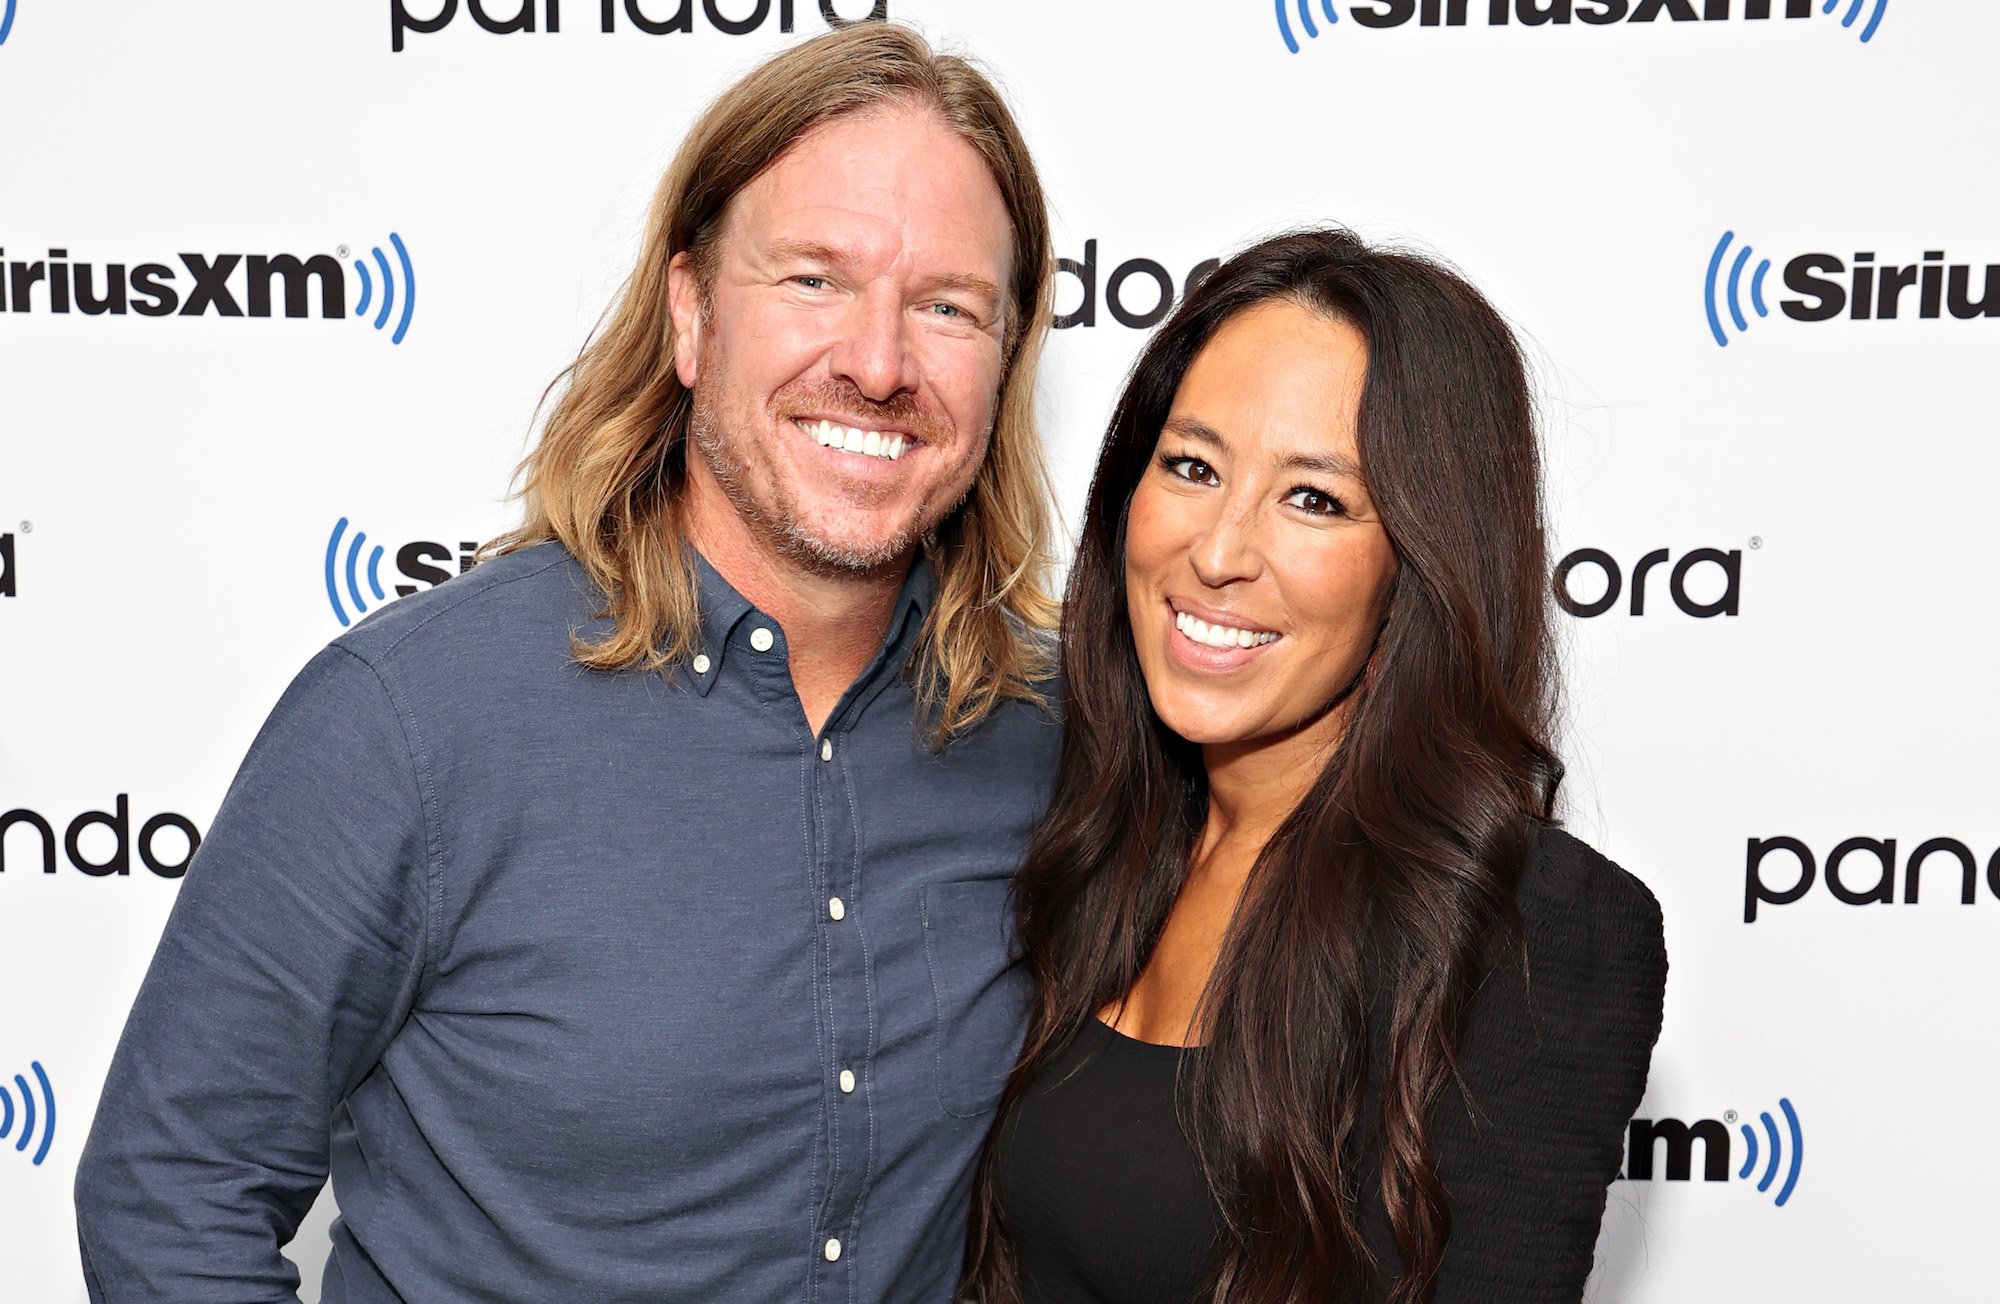 Joanna Gaines Hints at Having More Kids Because She’s ‘Terrified’ About Upcoming Family Dynamic Change